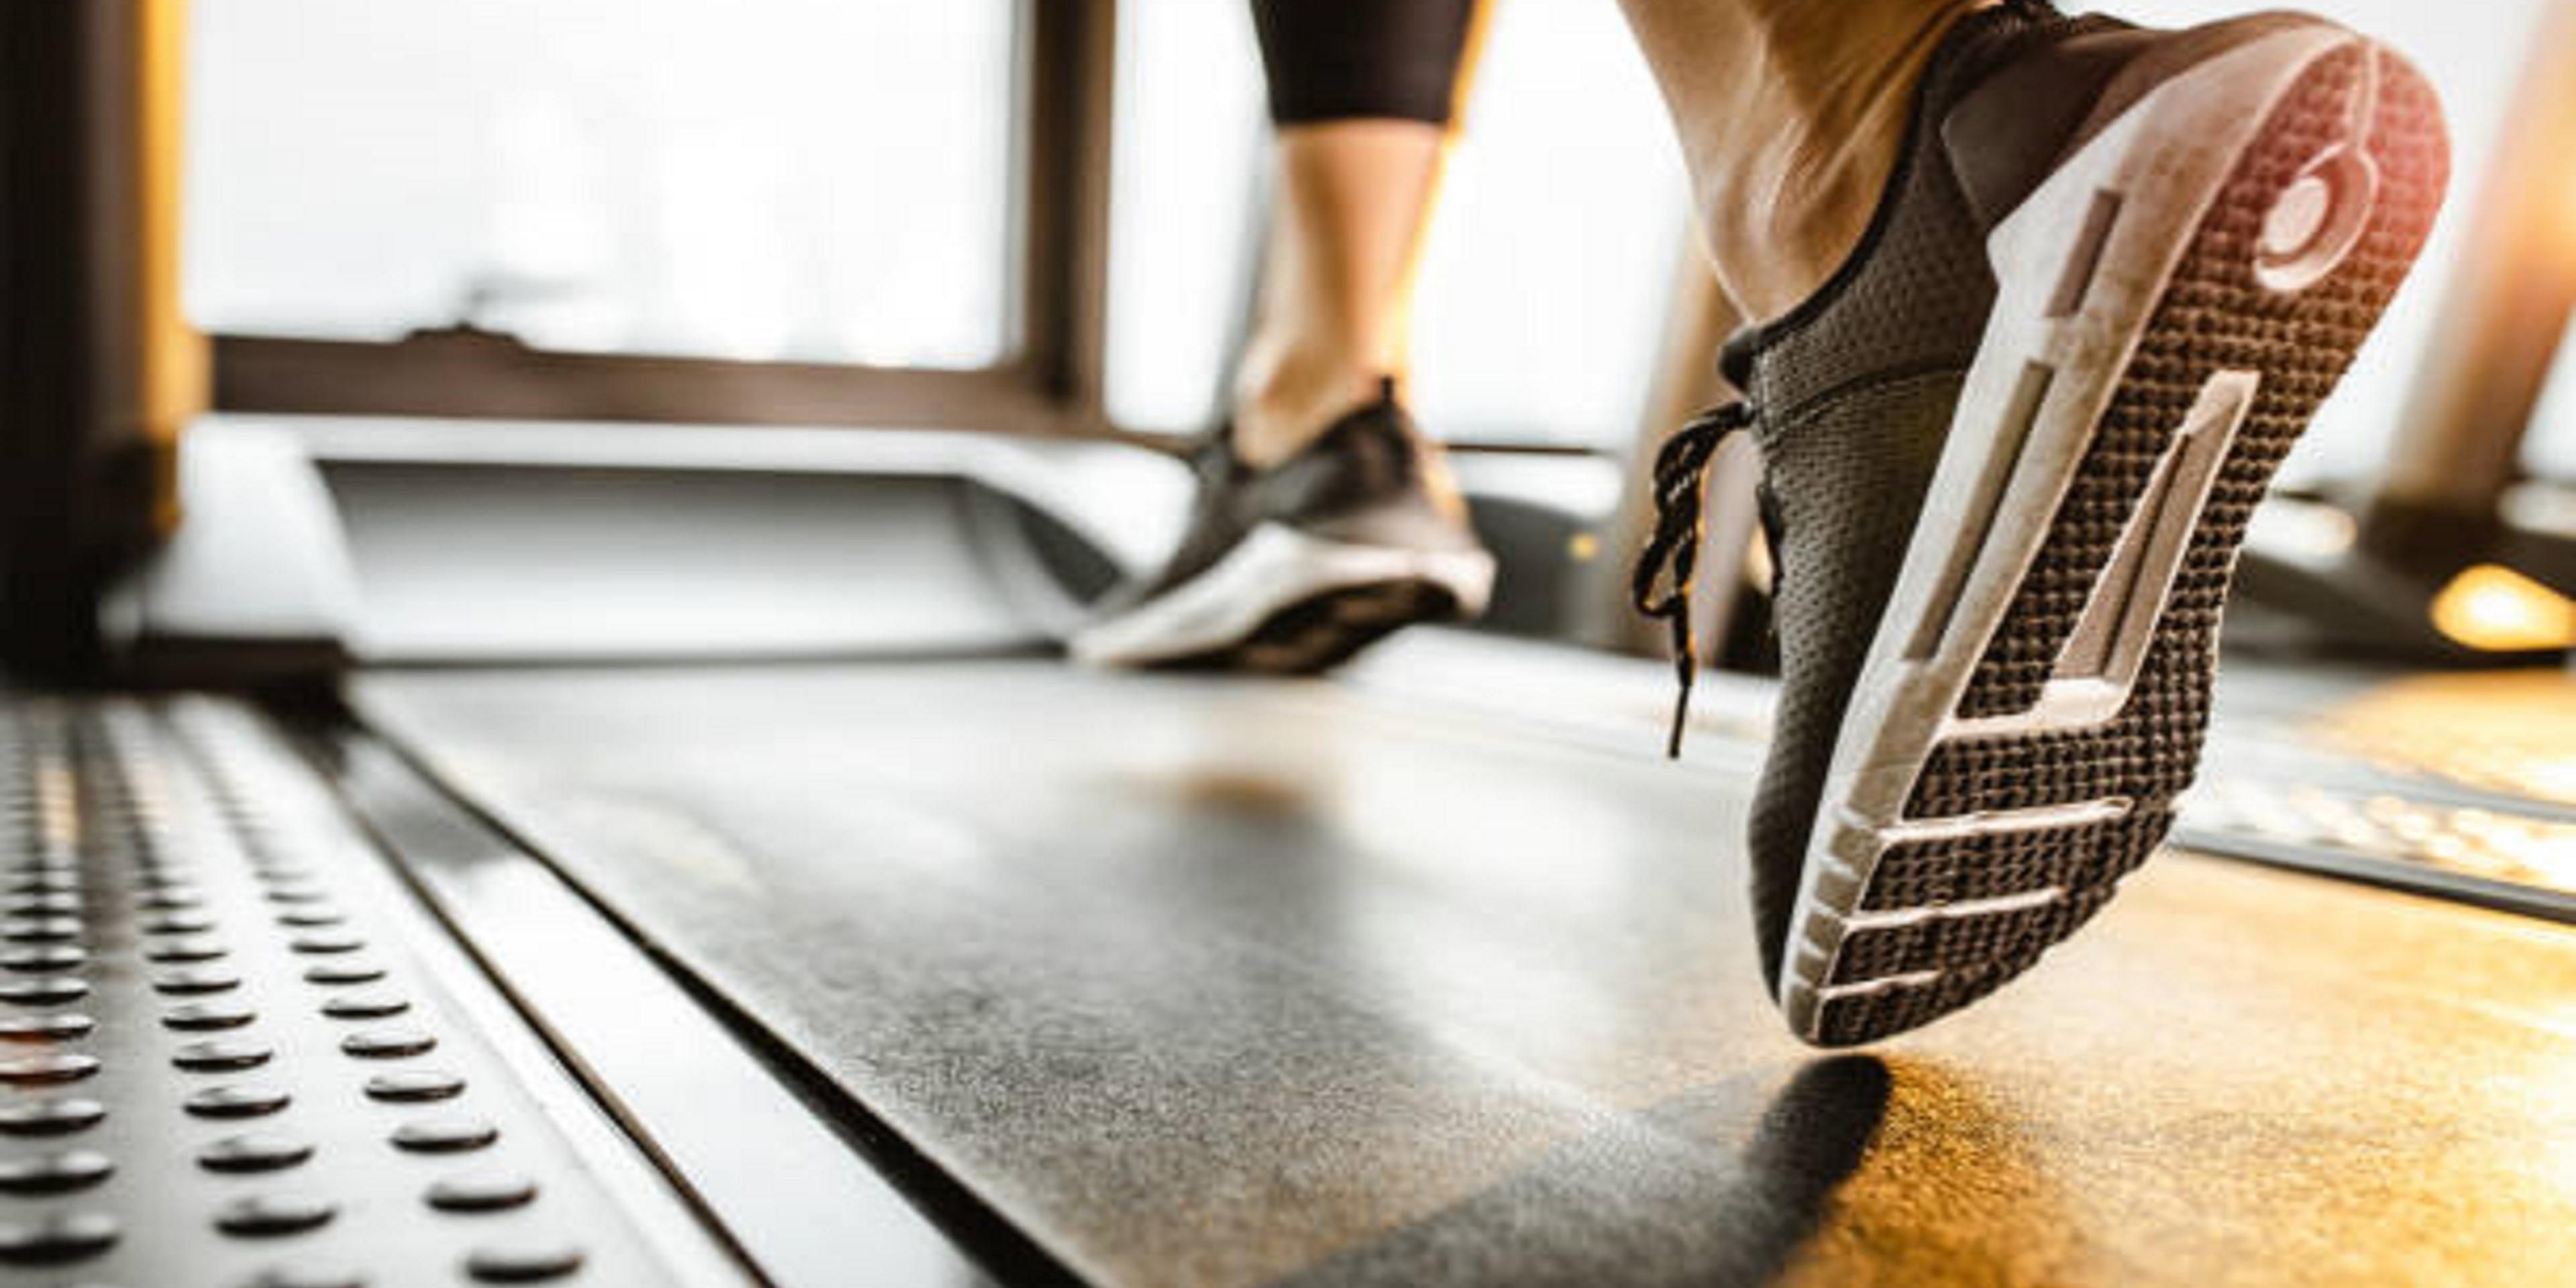 Get your sweat on in our complimentary, fully equipped Fitness Center with an Elliptical, Treadmill, Free Weights, and a Stationary Bike. Open 24 hours.